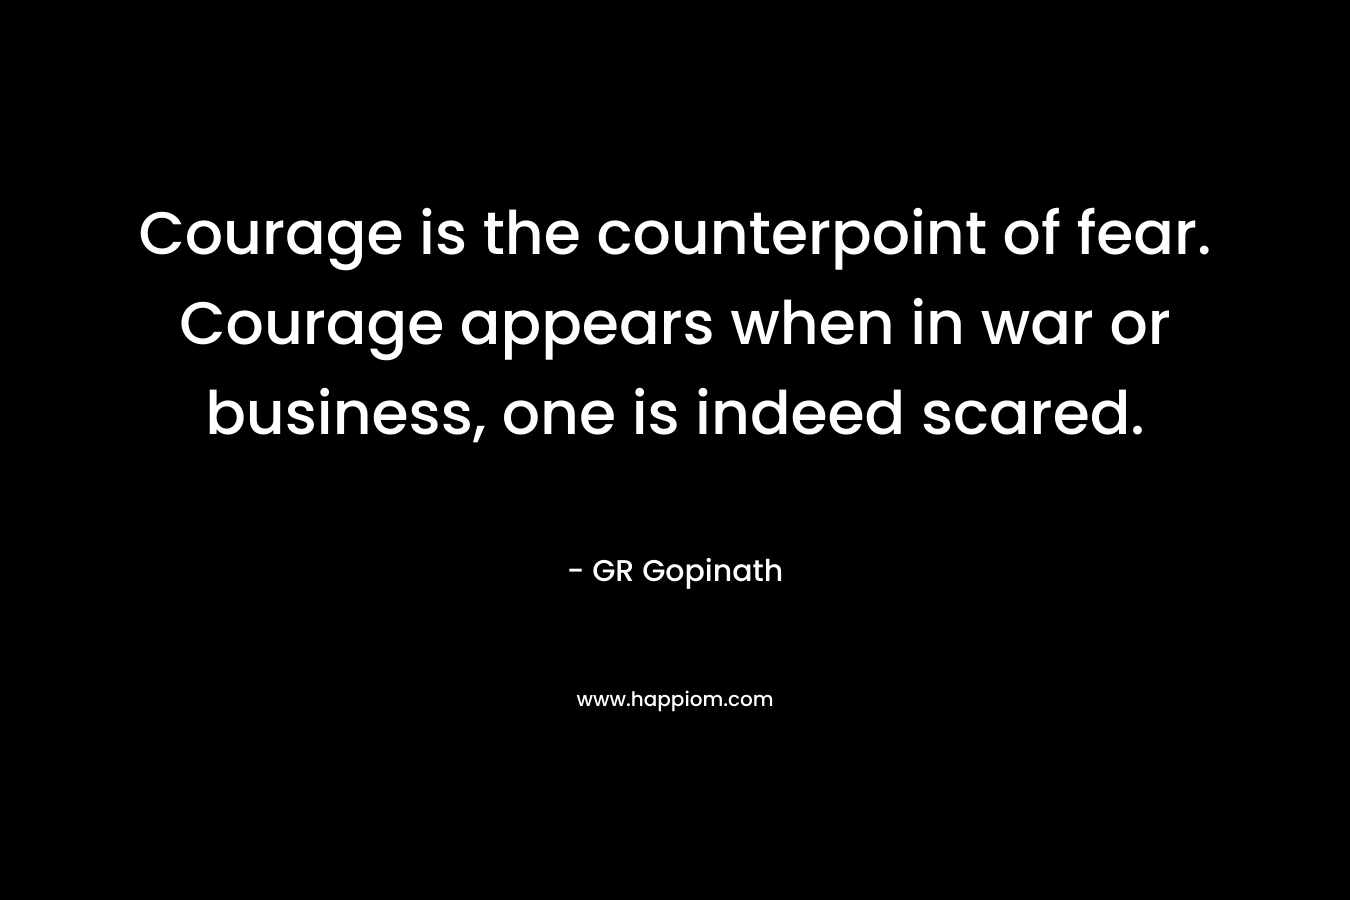 Courage is the counterpoint of fear. Courage appears when in war or business, one is indeed scared.